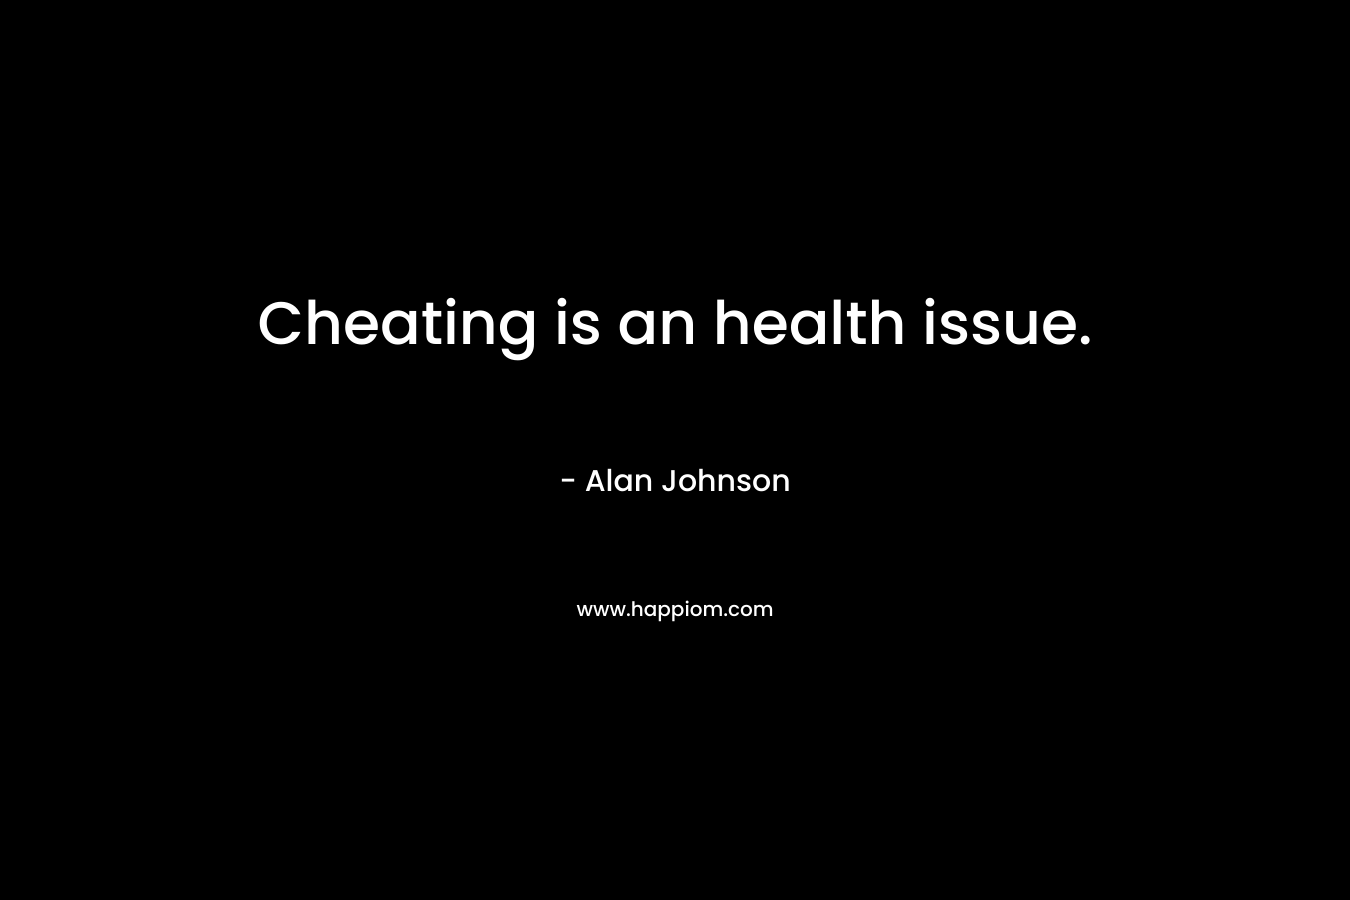 Cheating is an health issue.